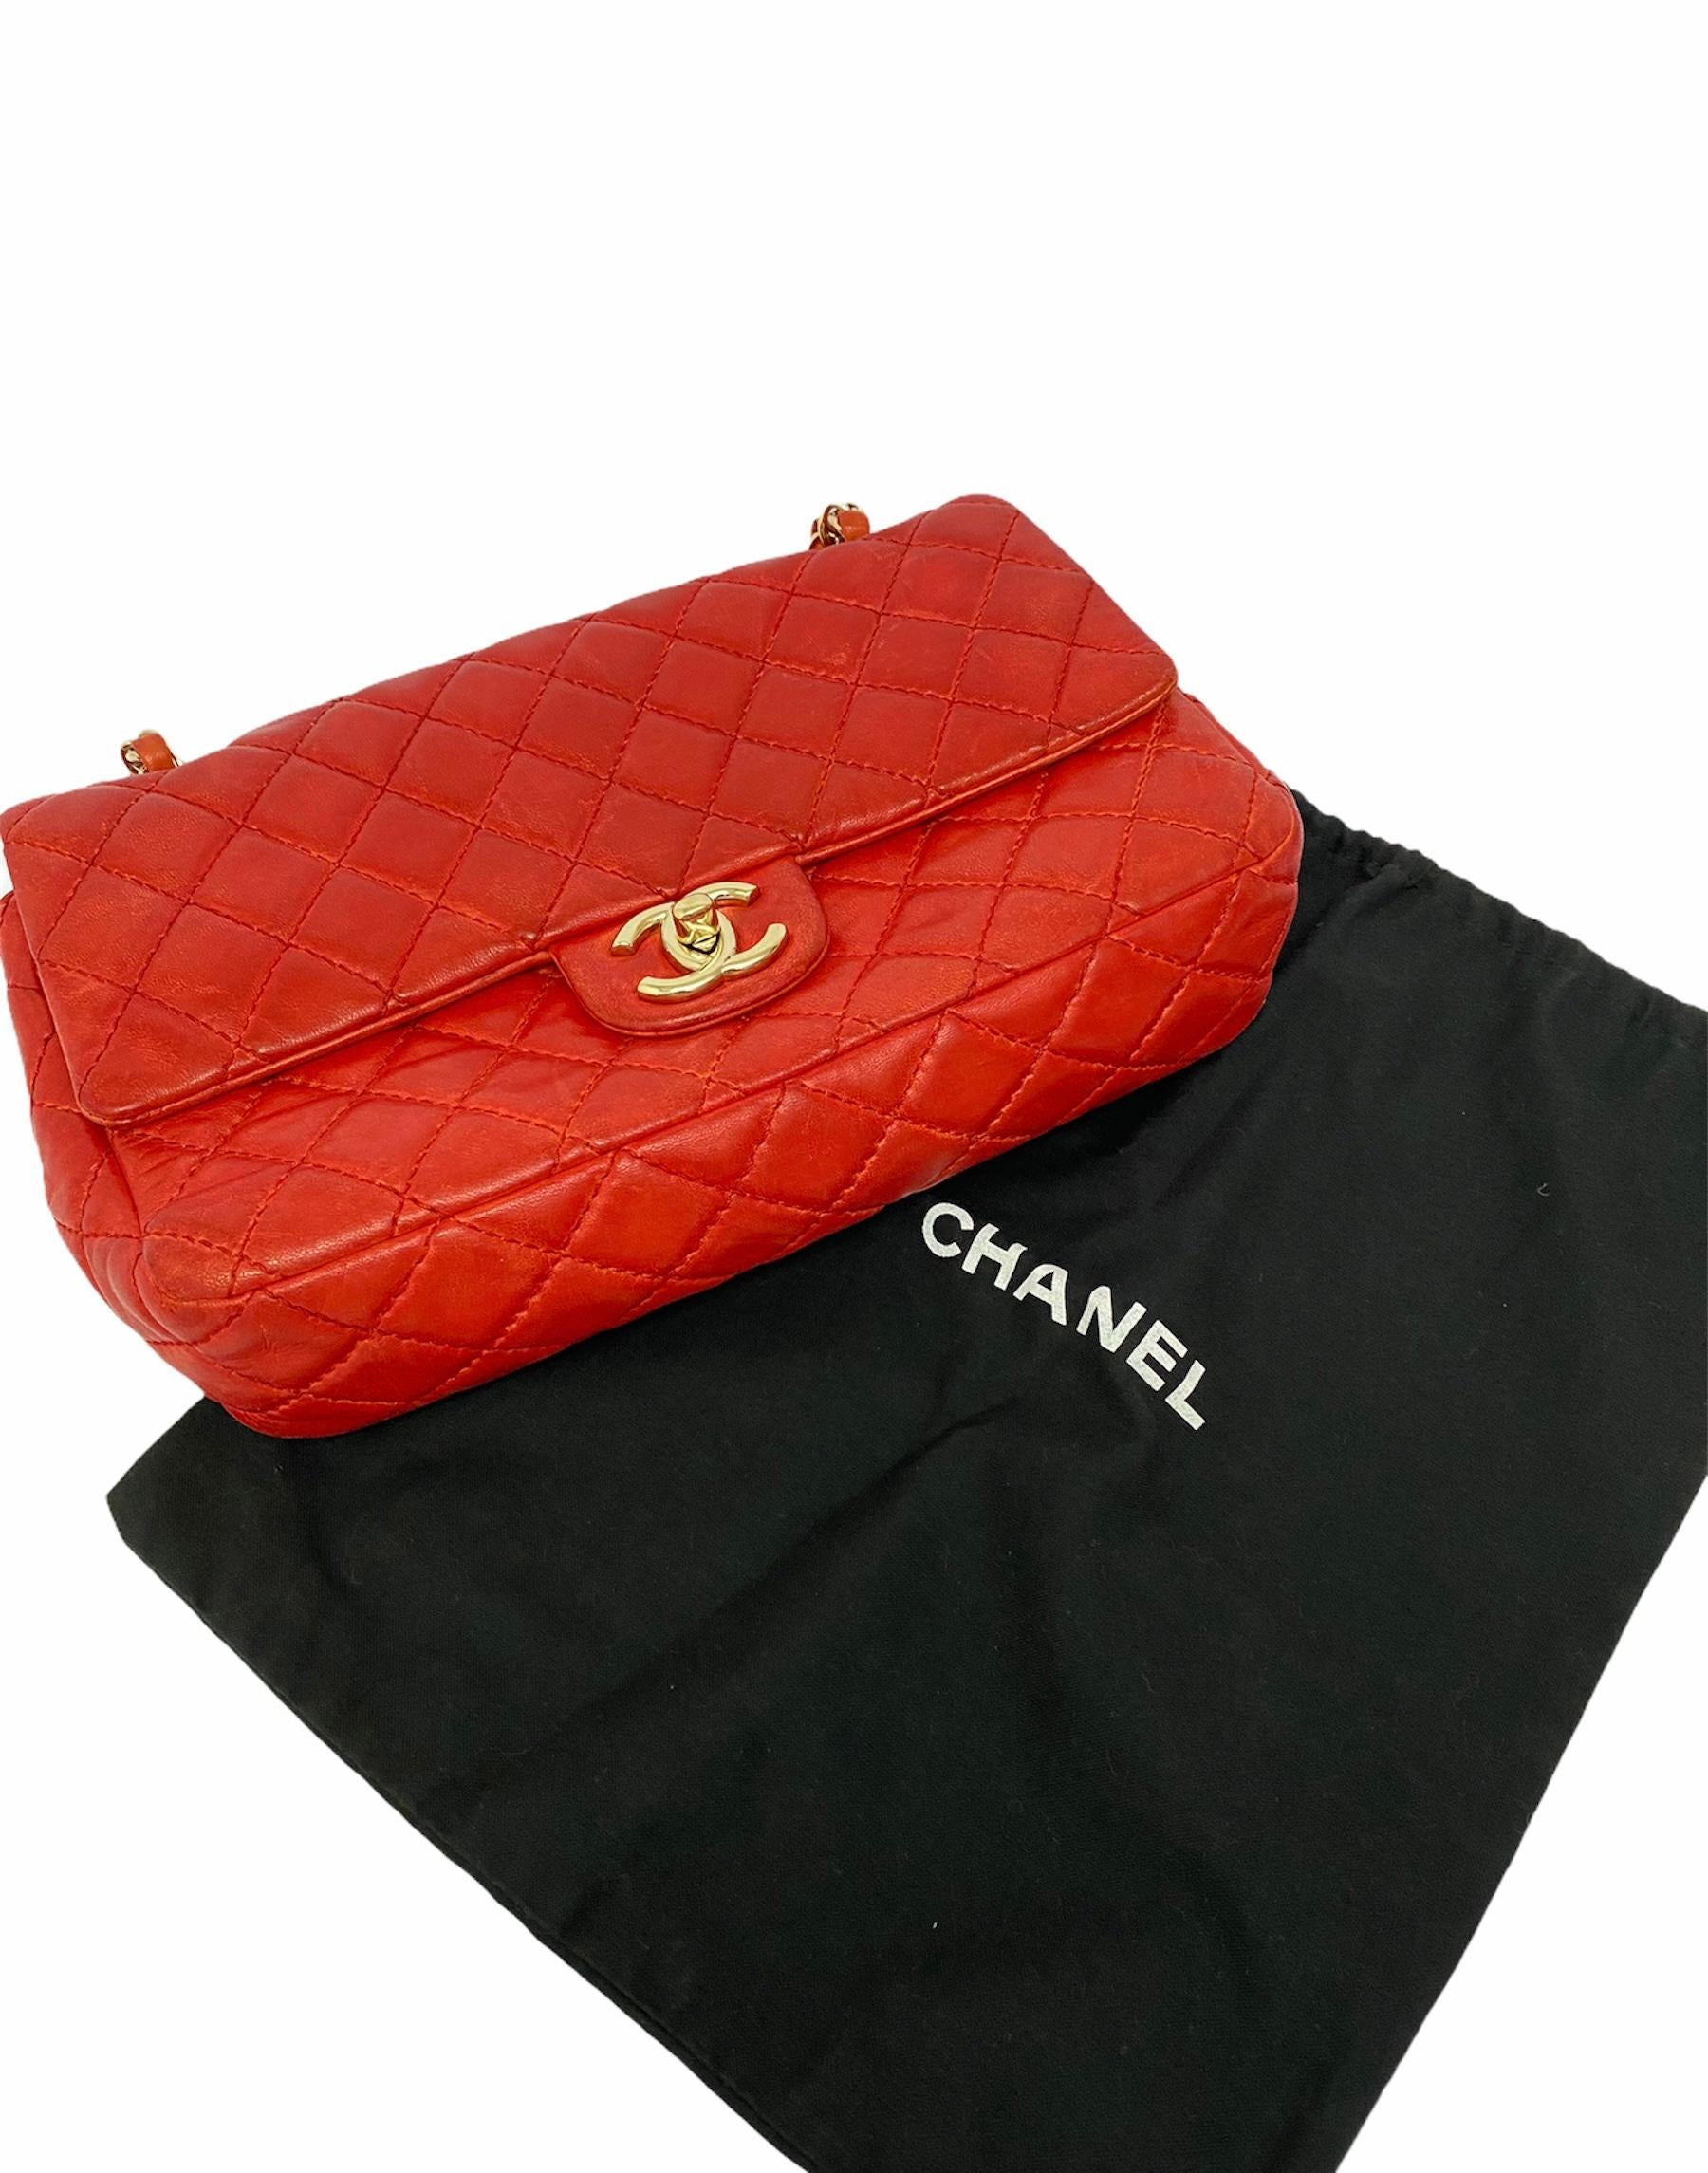 Chanel 2.55 Red Leather with Golden Hardware 8